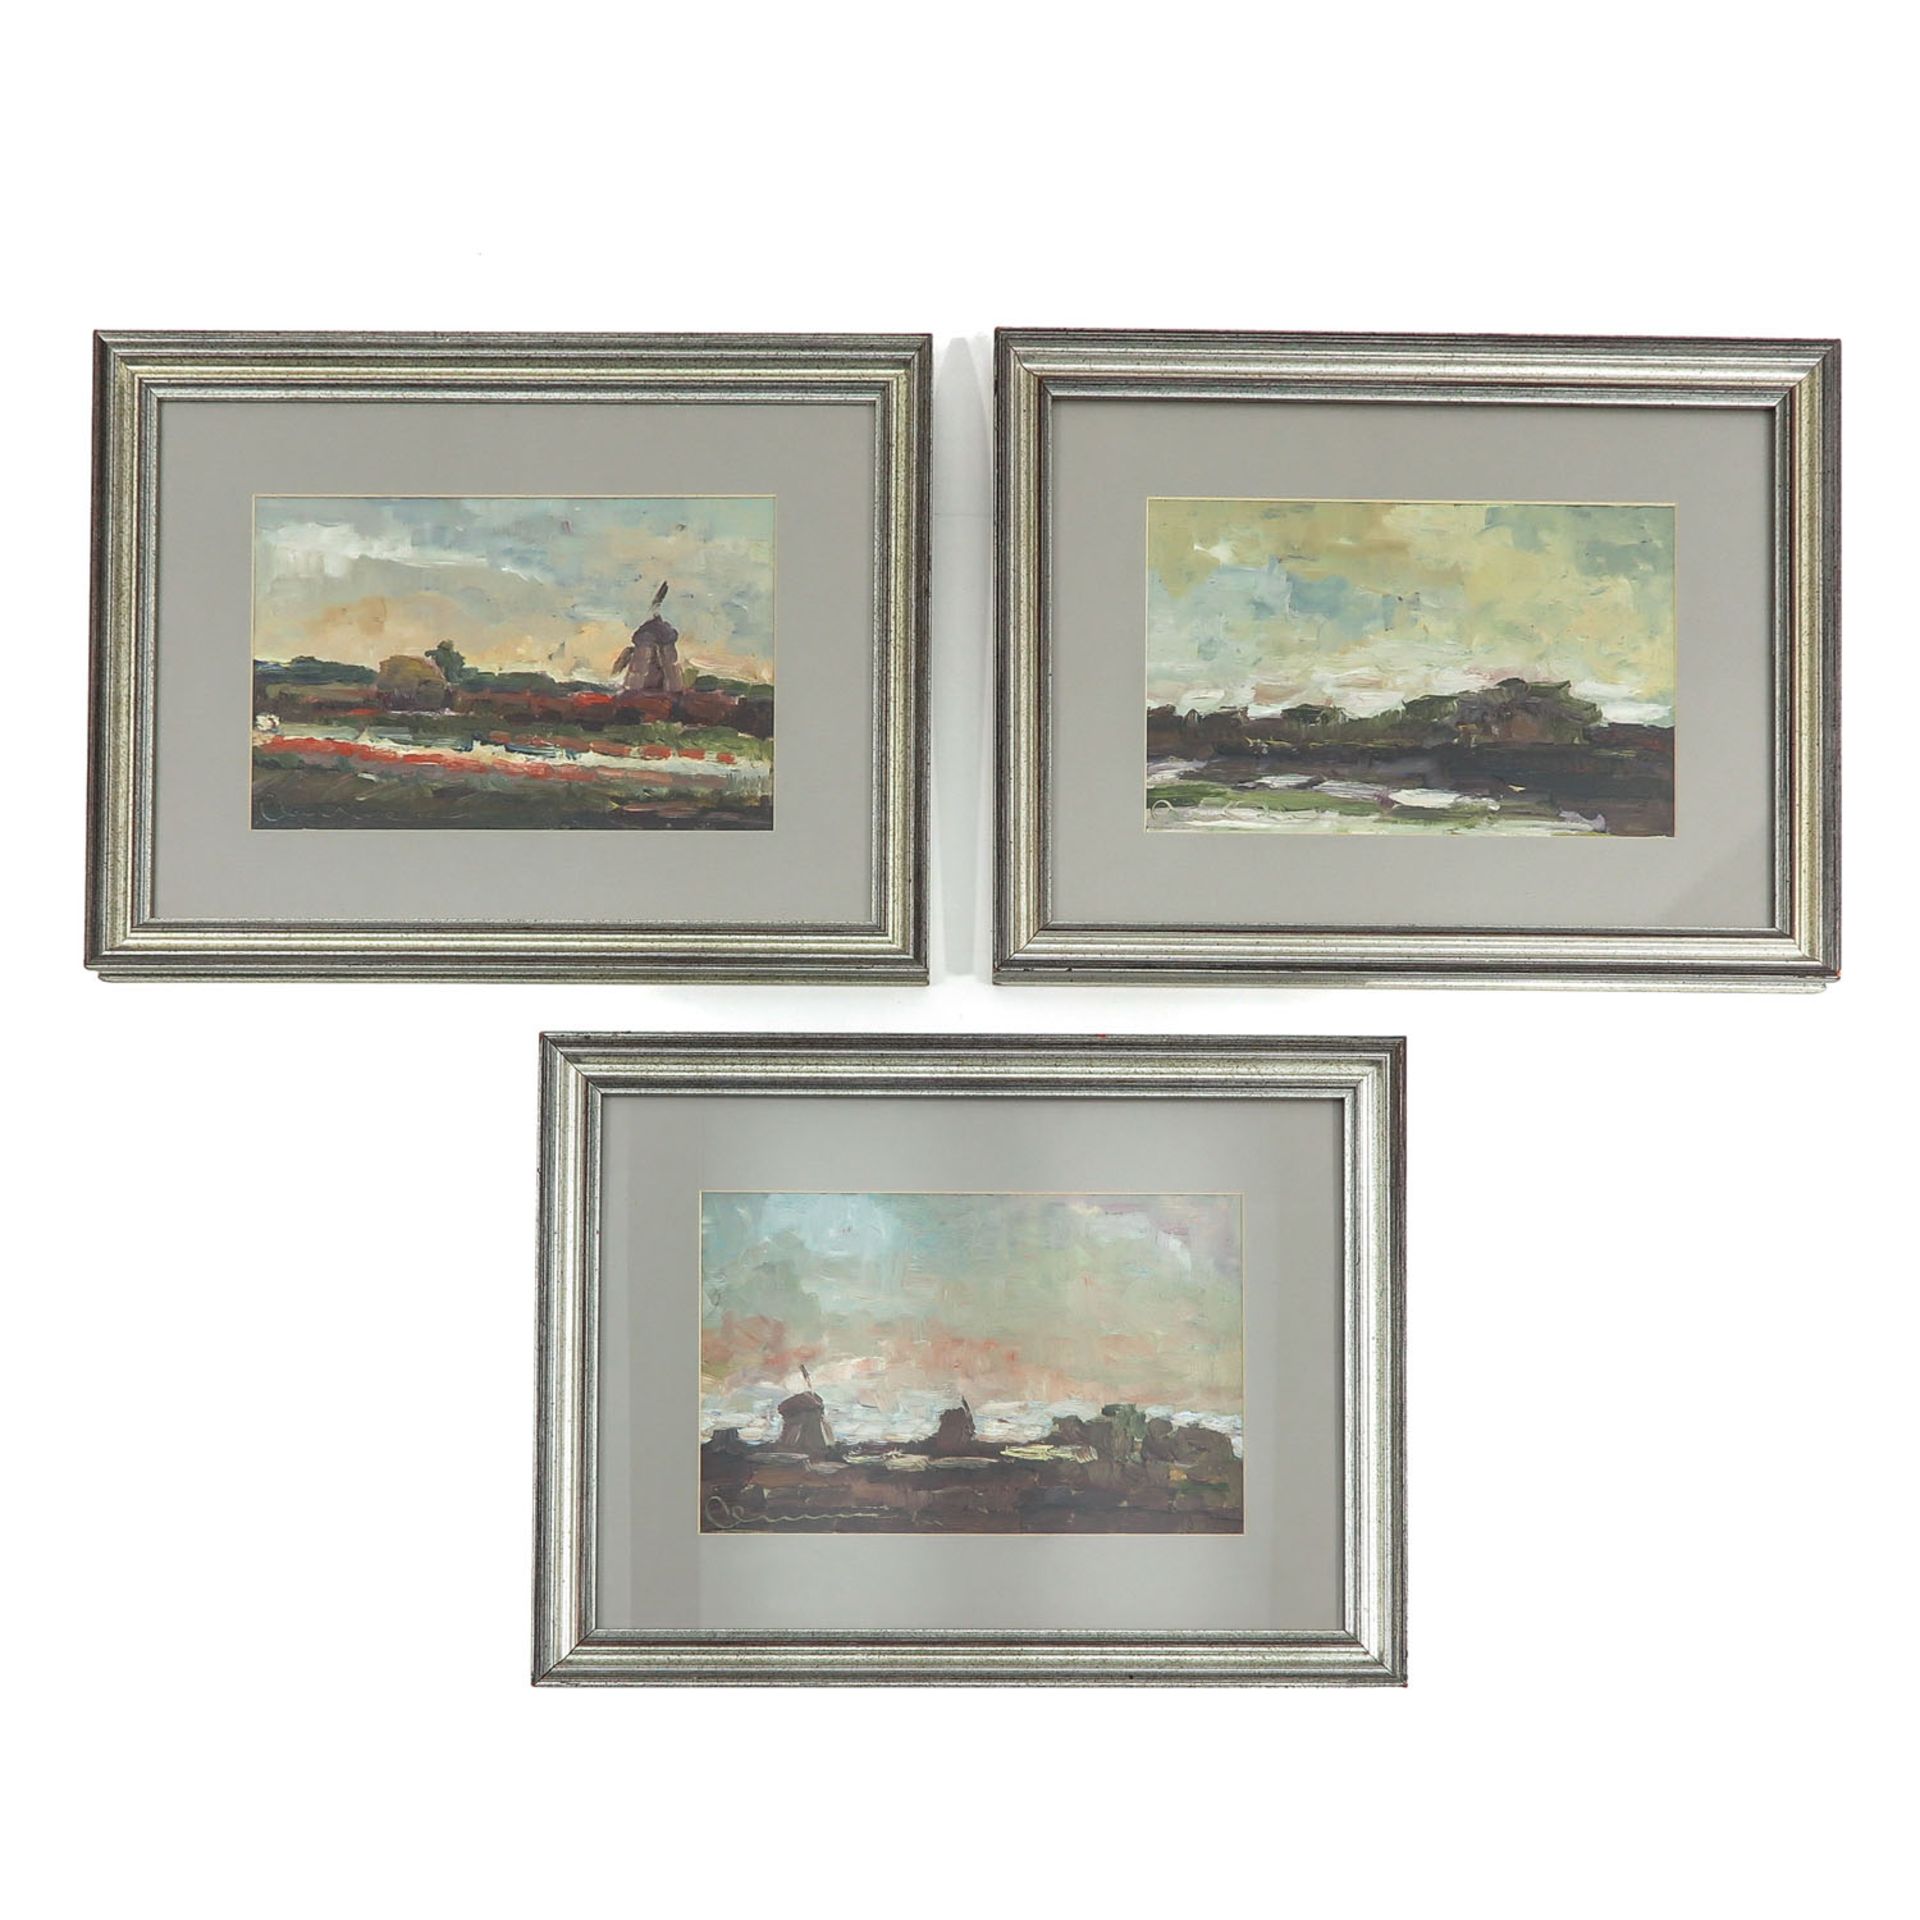 A Collection of 3 Paintings Attributed to Claude Monet